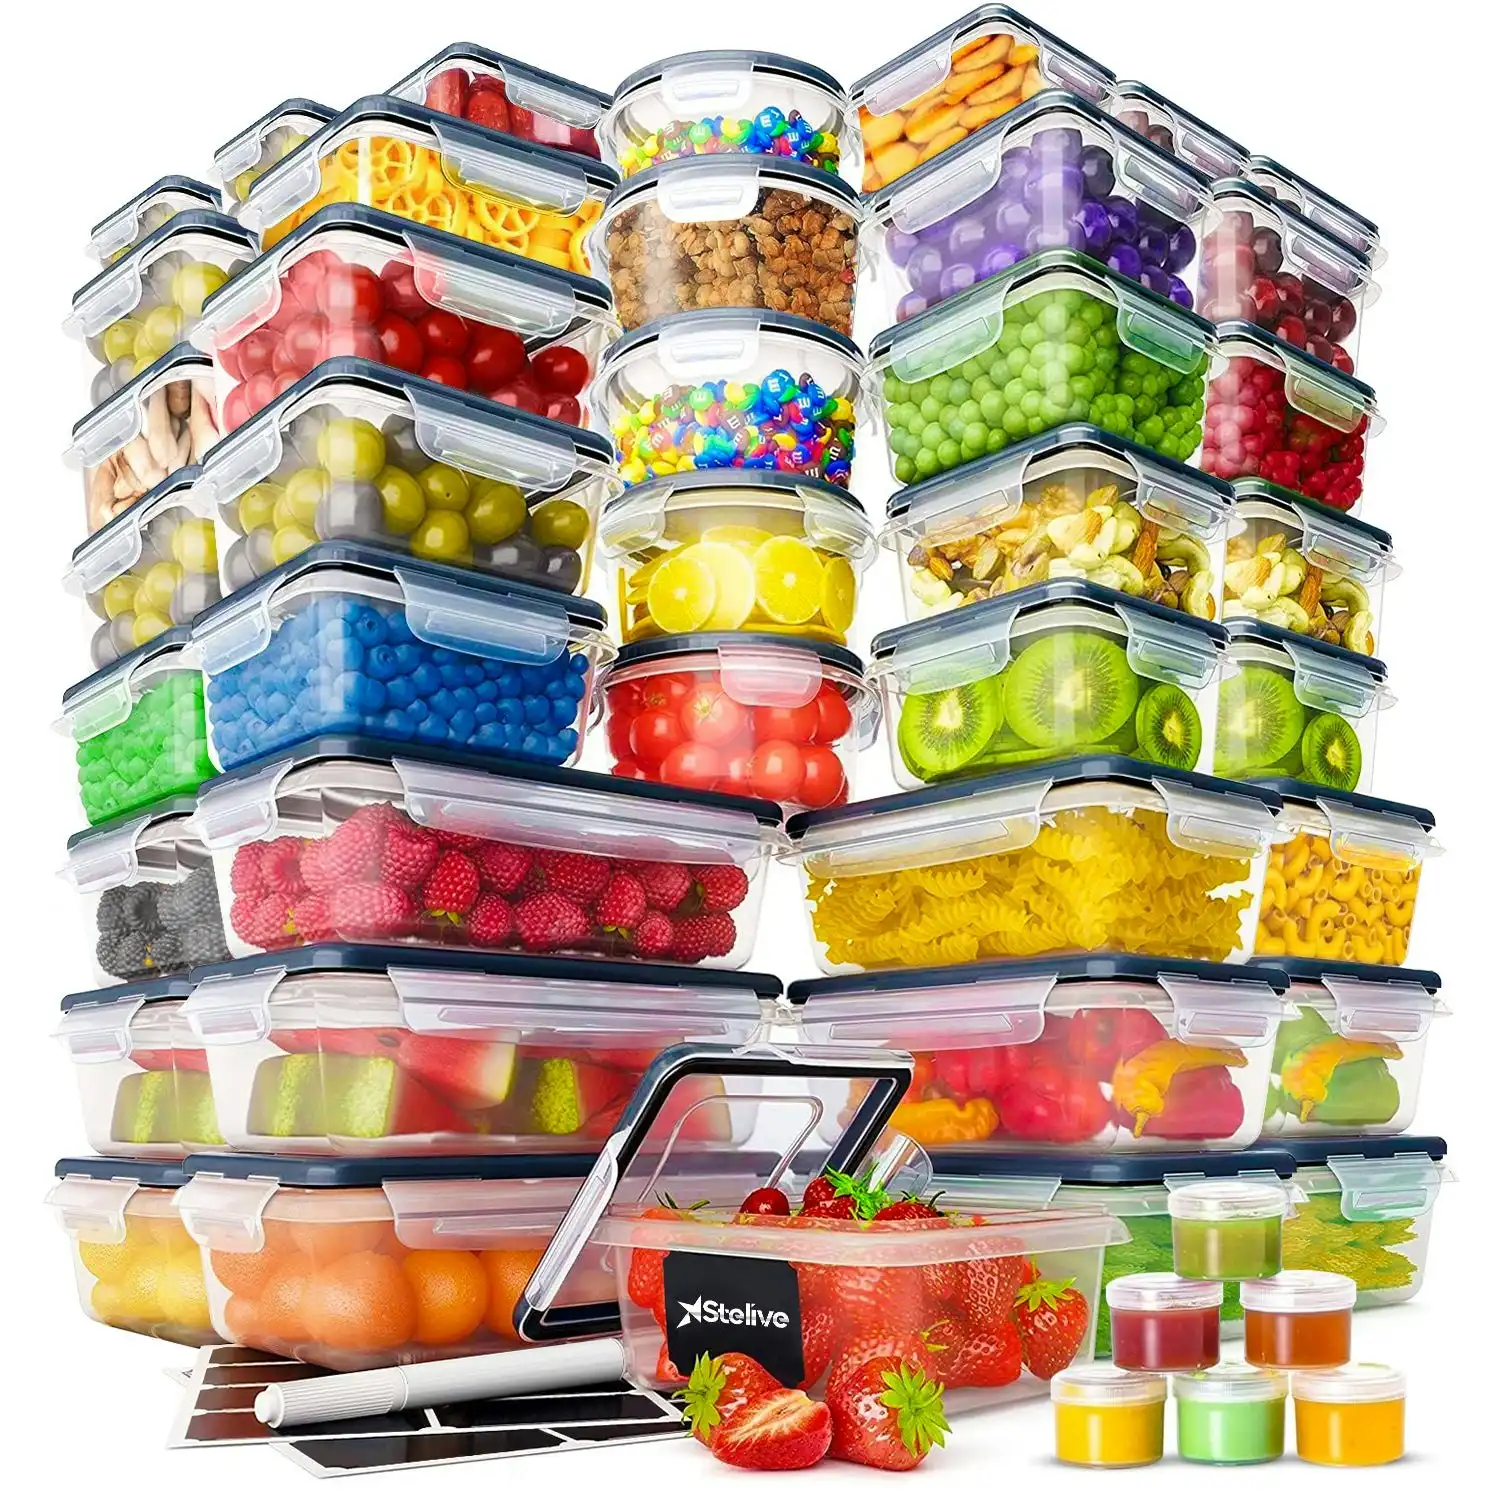 Stelive 56 PCs Food Storage Container Set, Leak Proof Lunch Boxes, BPA-Free Clear Plastic Storage Containers for Home & Kitchen Organization with Labels & Pen